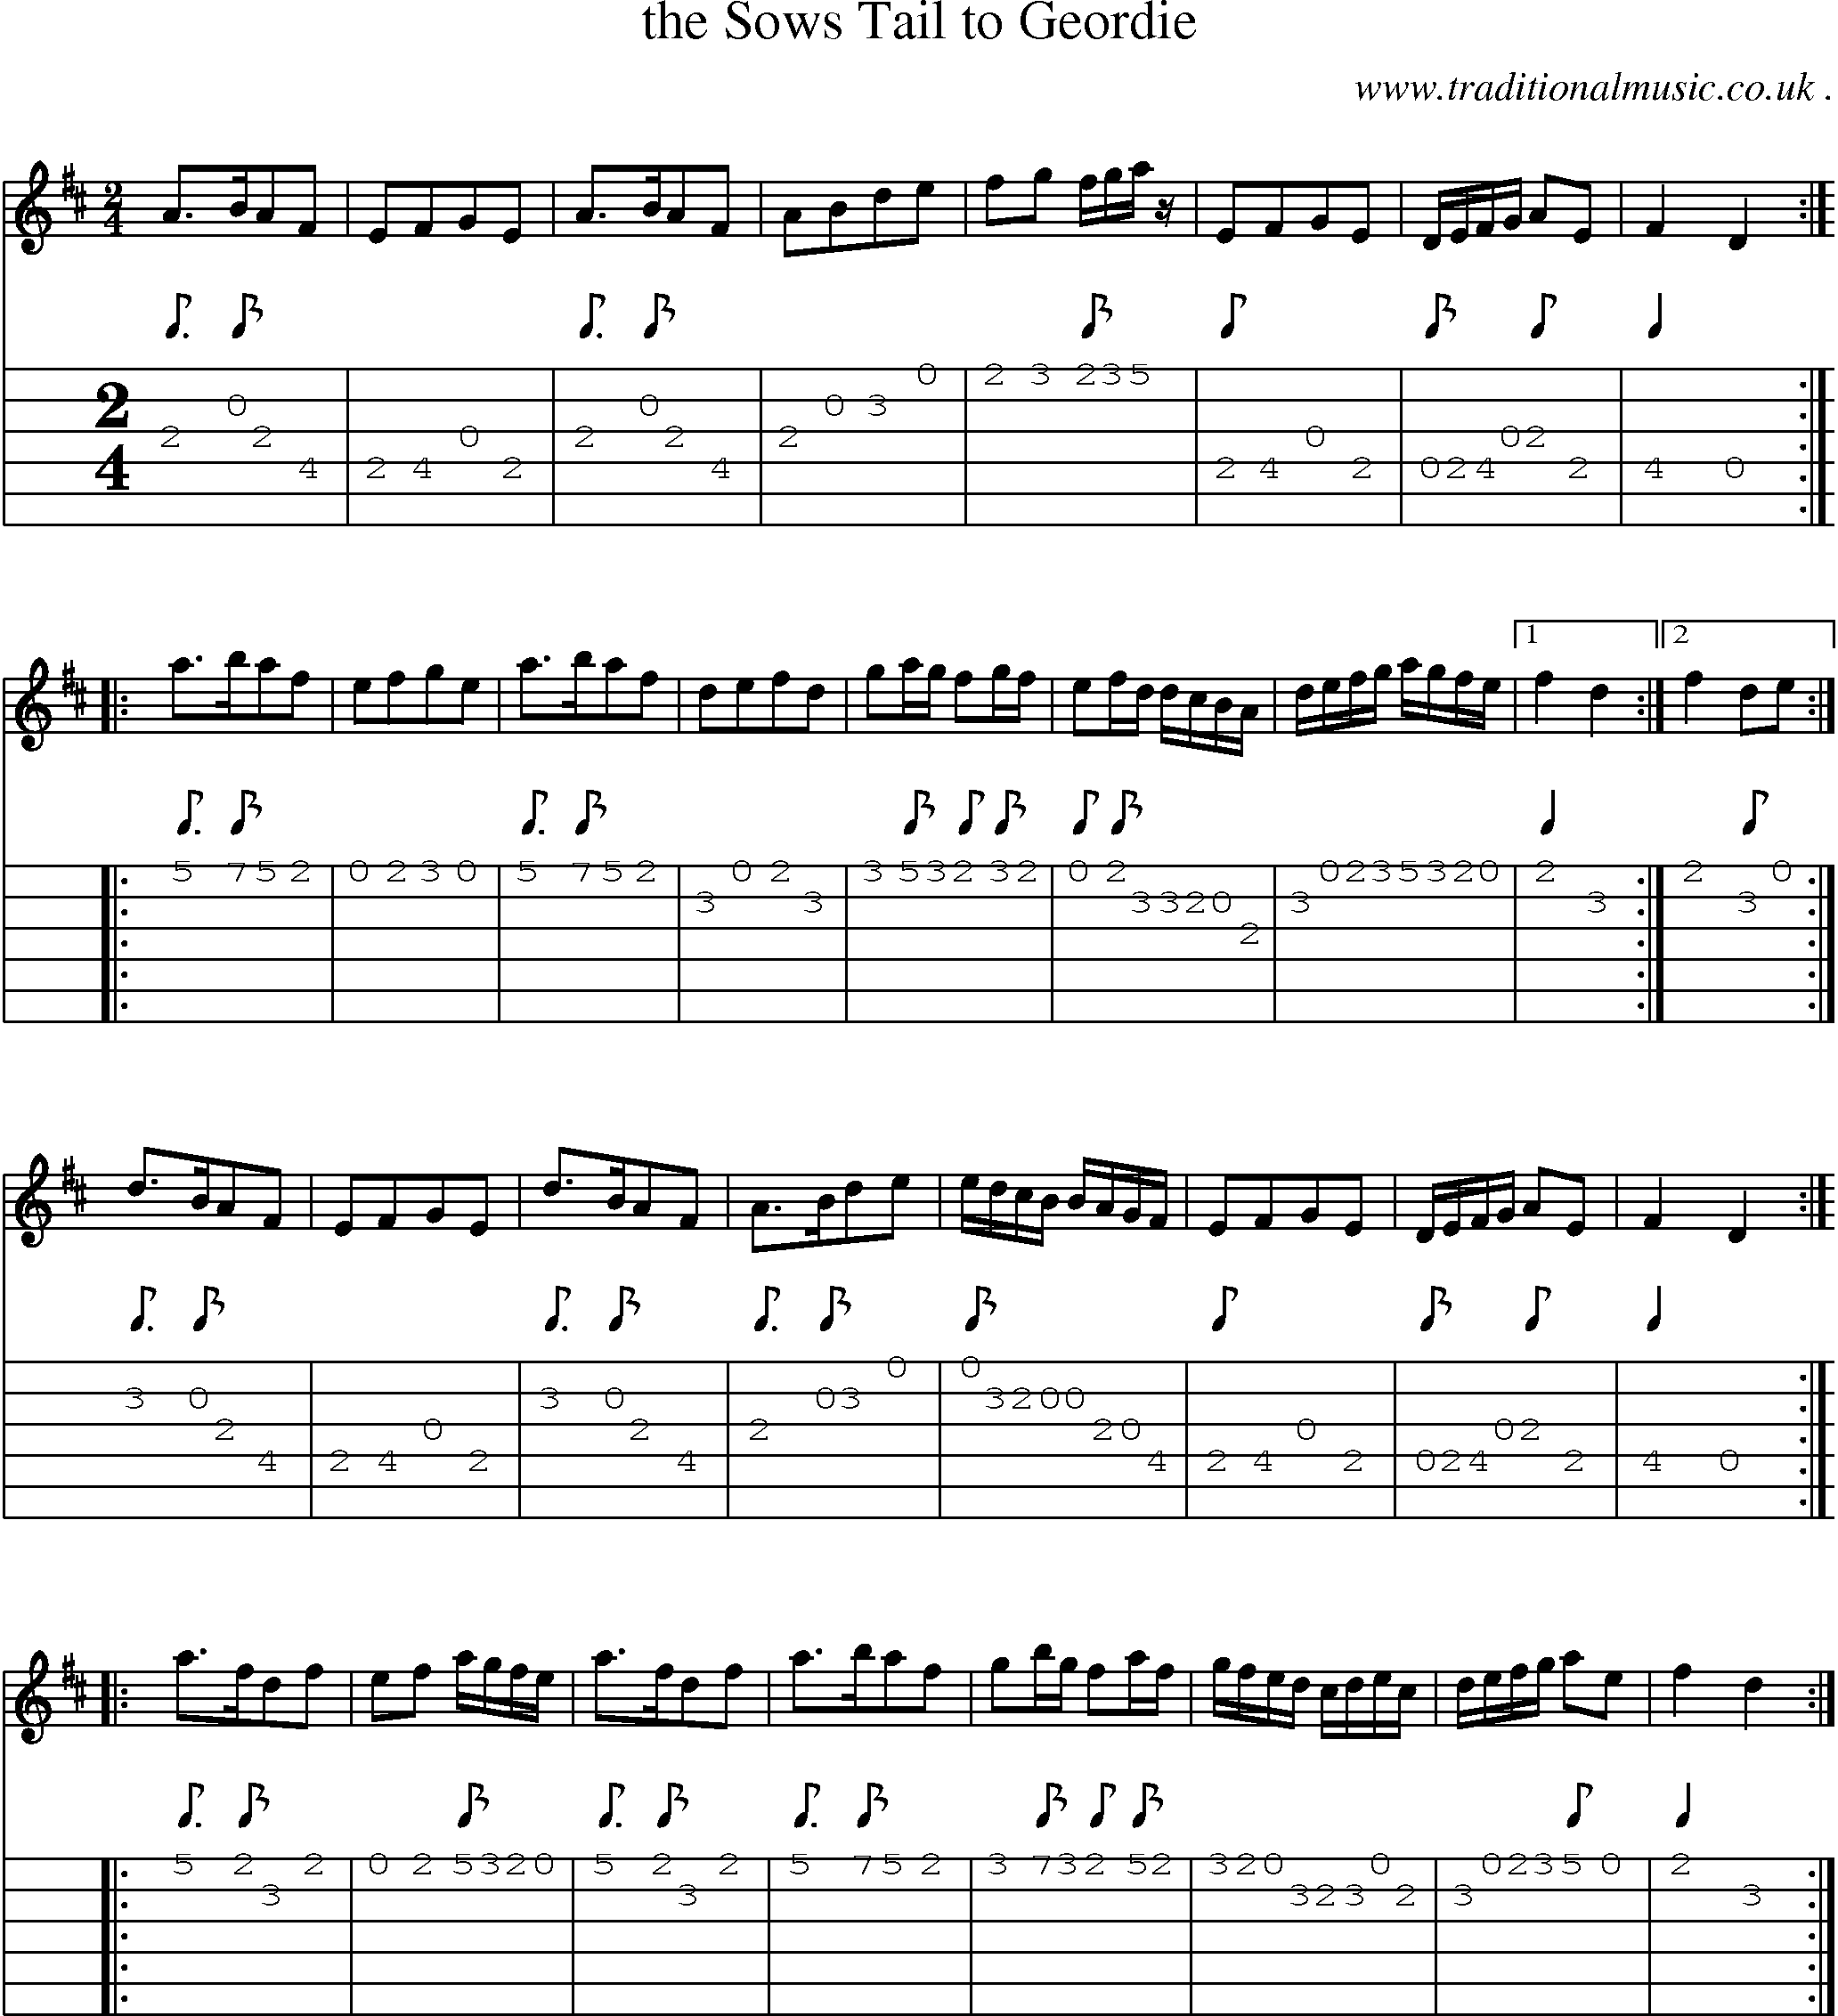 Sheet-Music and Guitar Tabs for The Sows Tail To Geordie